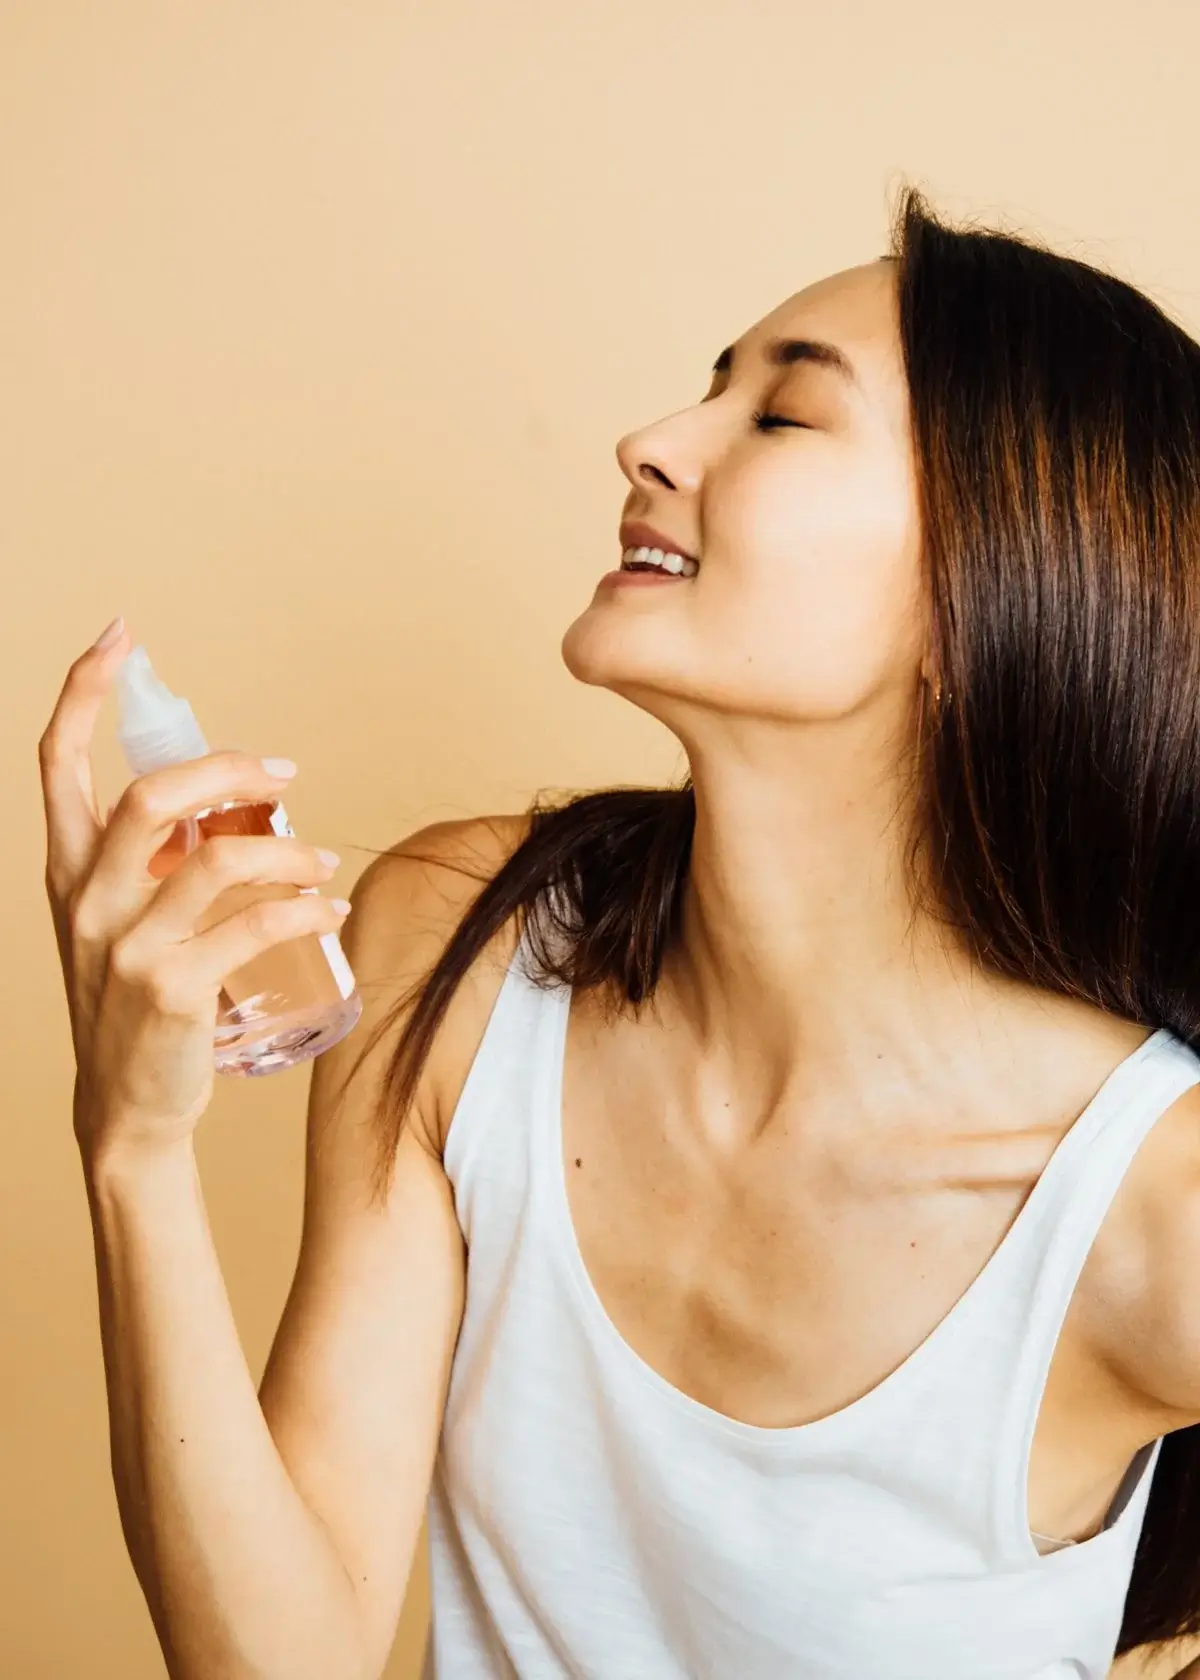 What are the benefits of rose water for face?